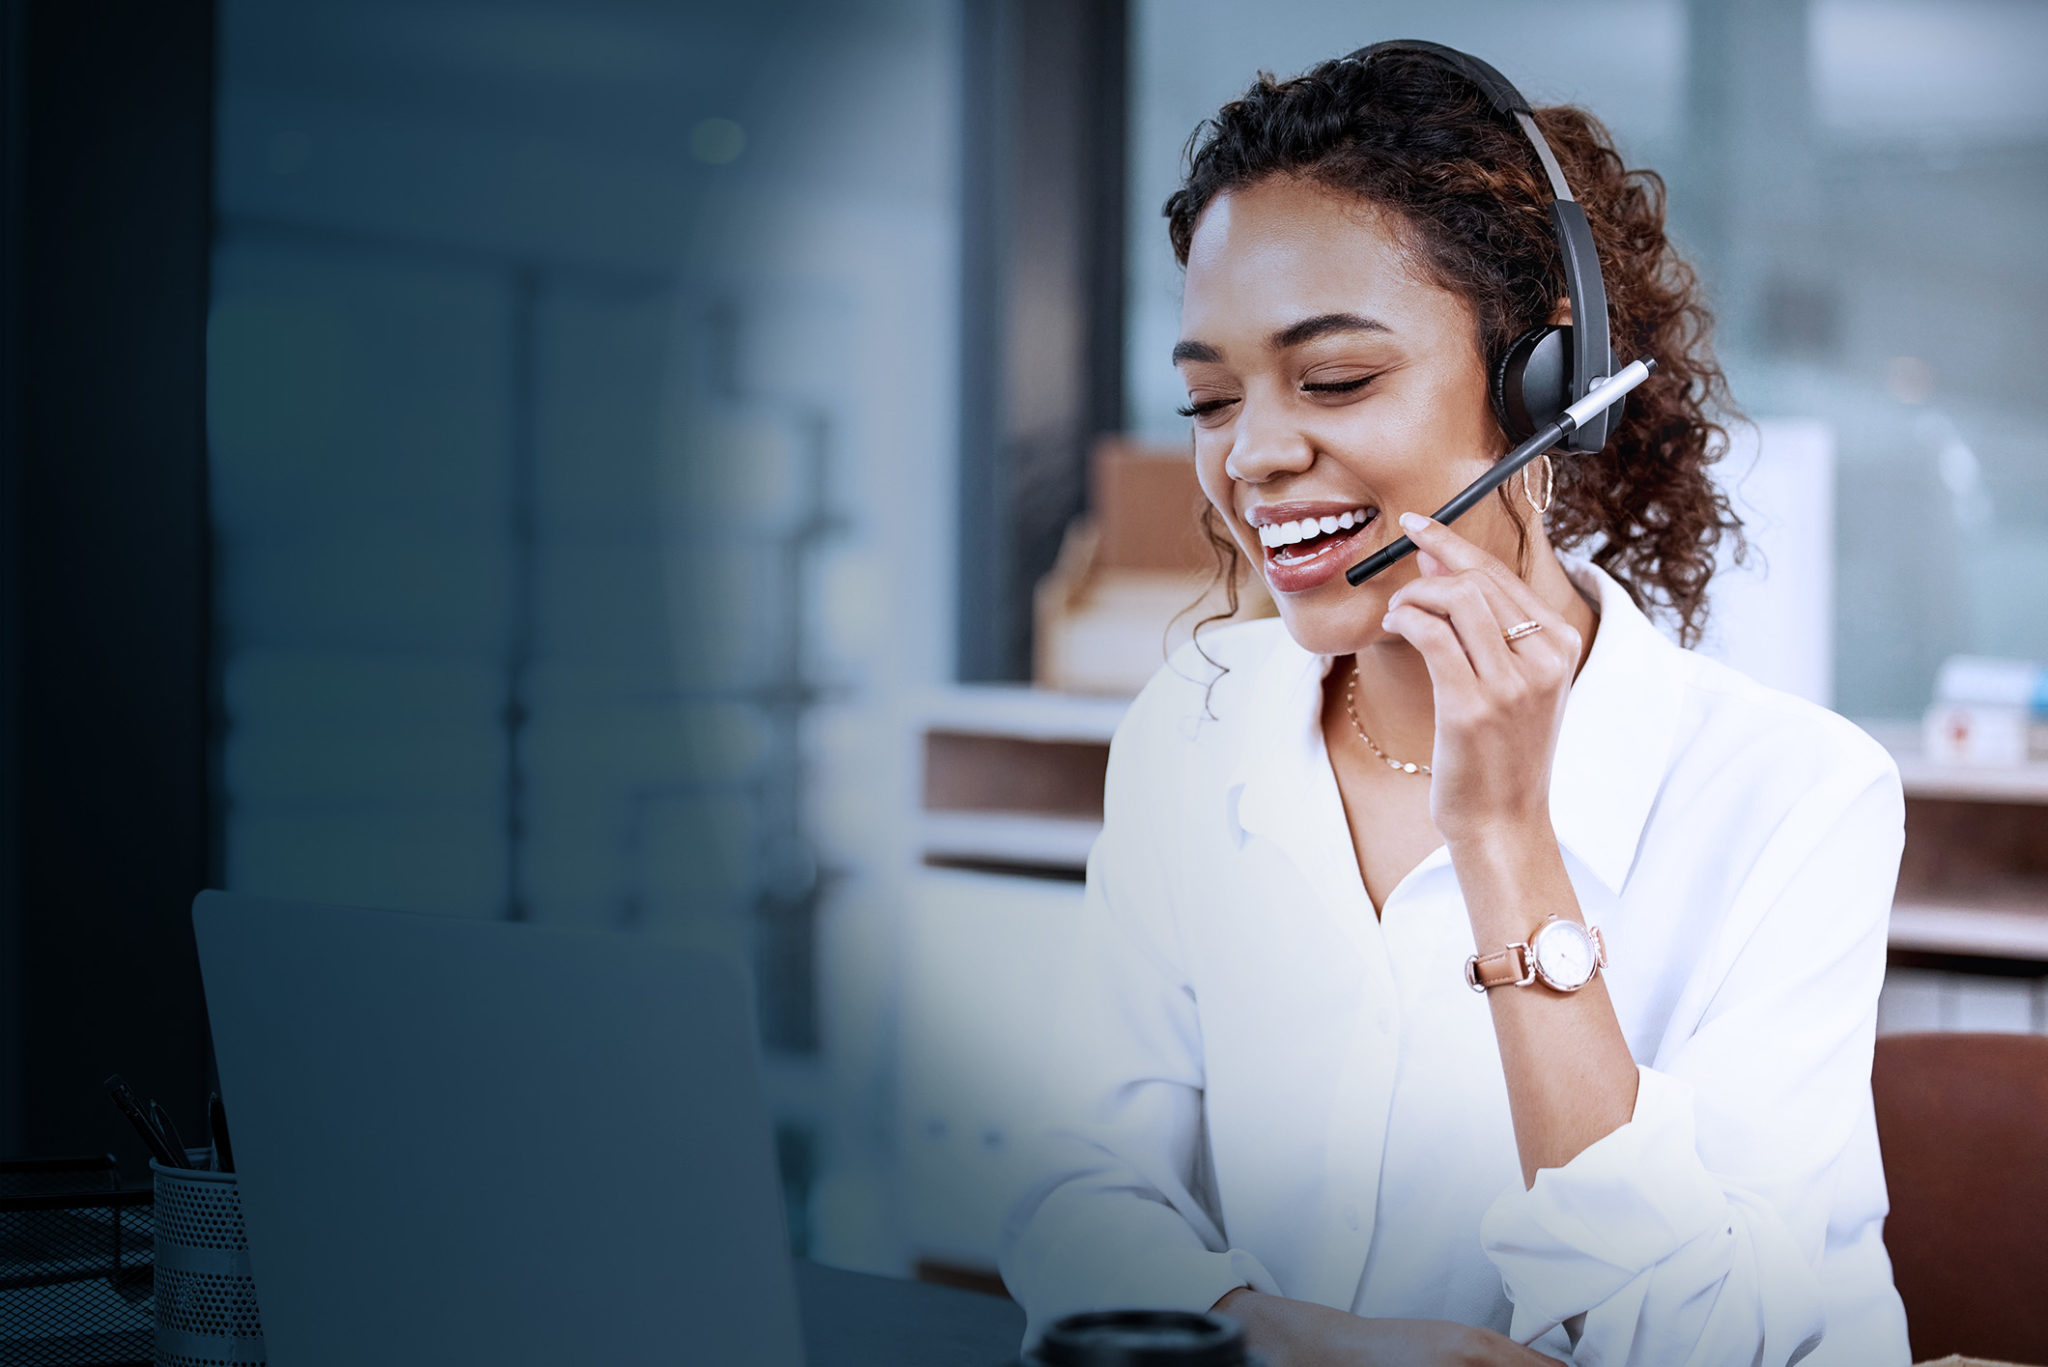 Future-proof your contact center with cloud-based tools from Five9 and CBTS